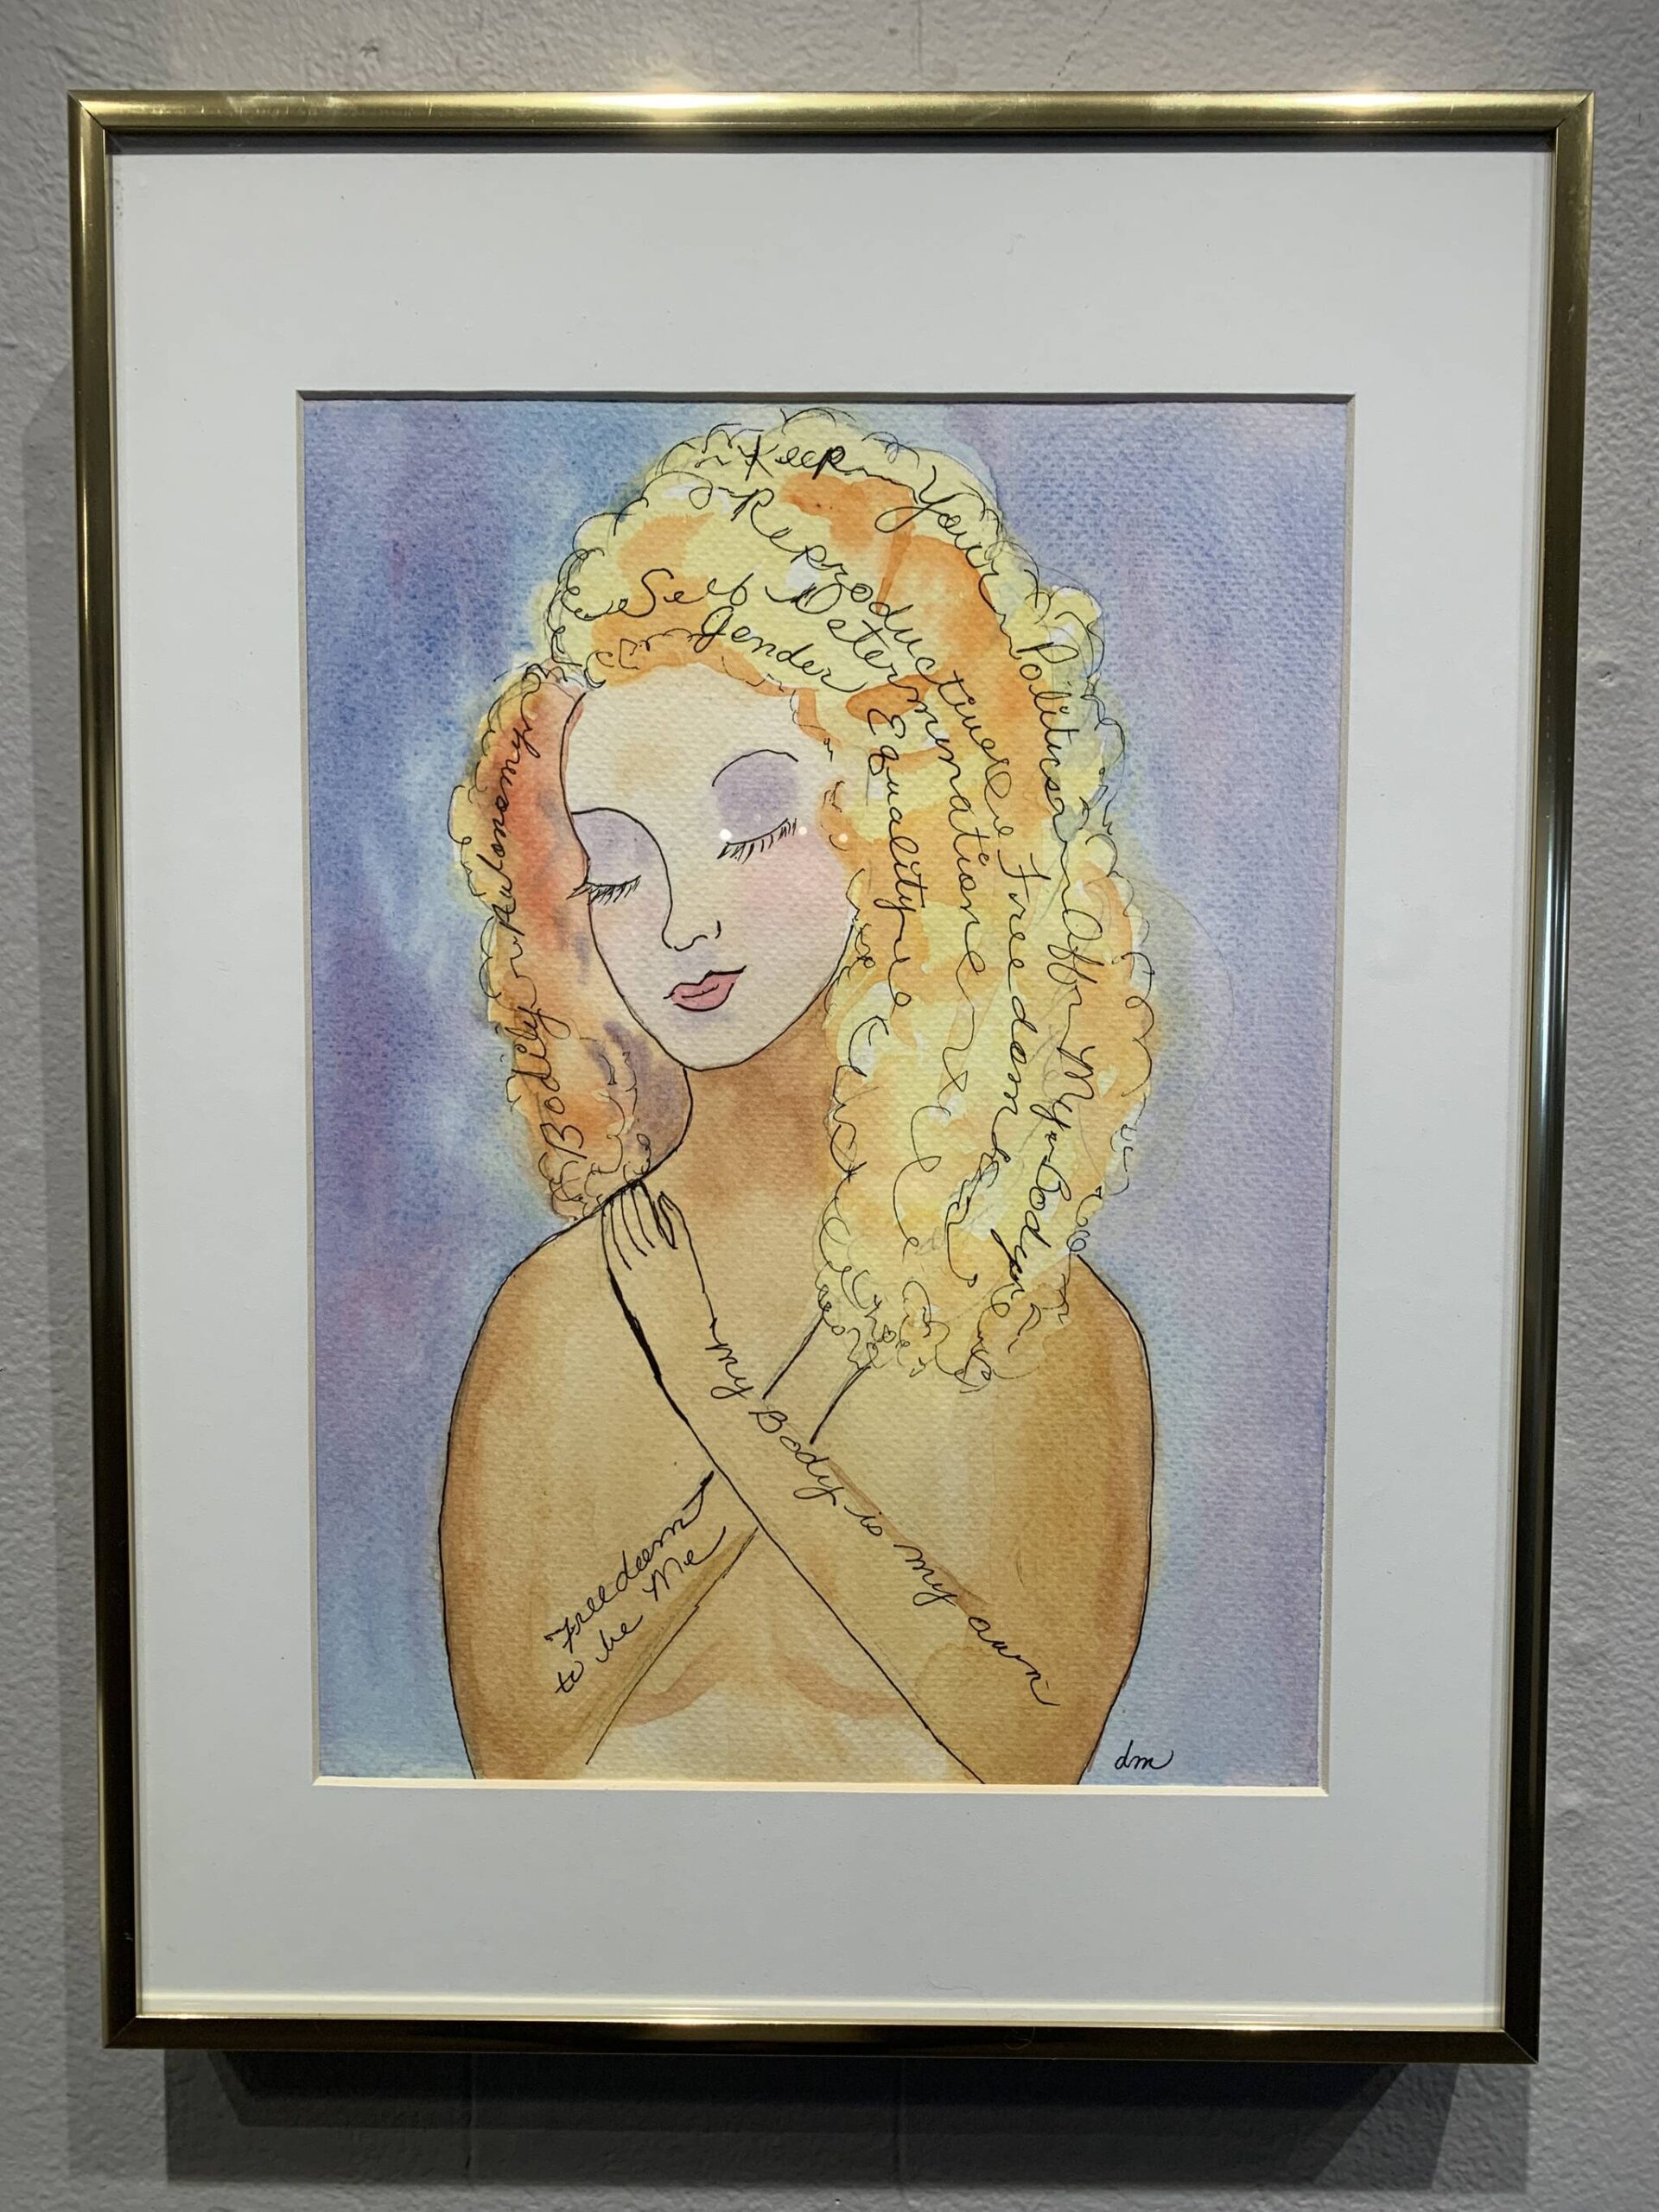 “Woman,” a watercolor painting by Donna Martin, is on display March 16 at Homer Council on the Arts through March as part of the “Bodily Autonomy” exhibit co-sponsored by Kachemak Bay Family Planning Clinic. (Photo by Christina Whiting/Homer News)